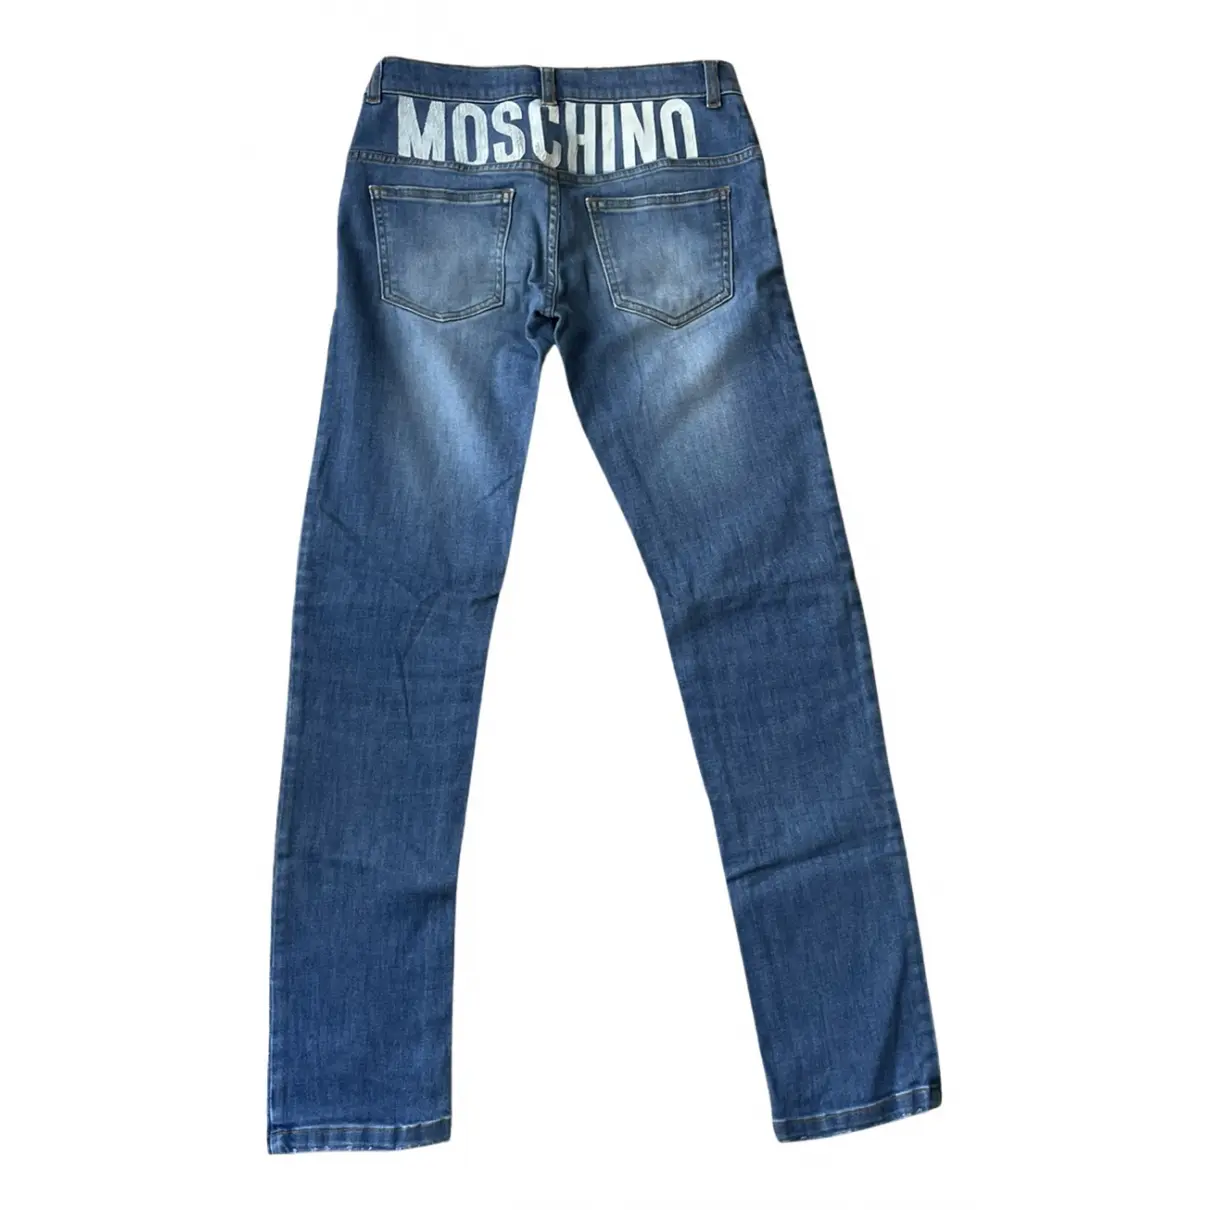 Buy Moschino Jeans online